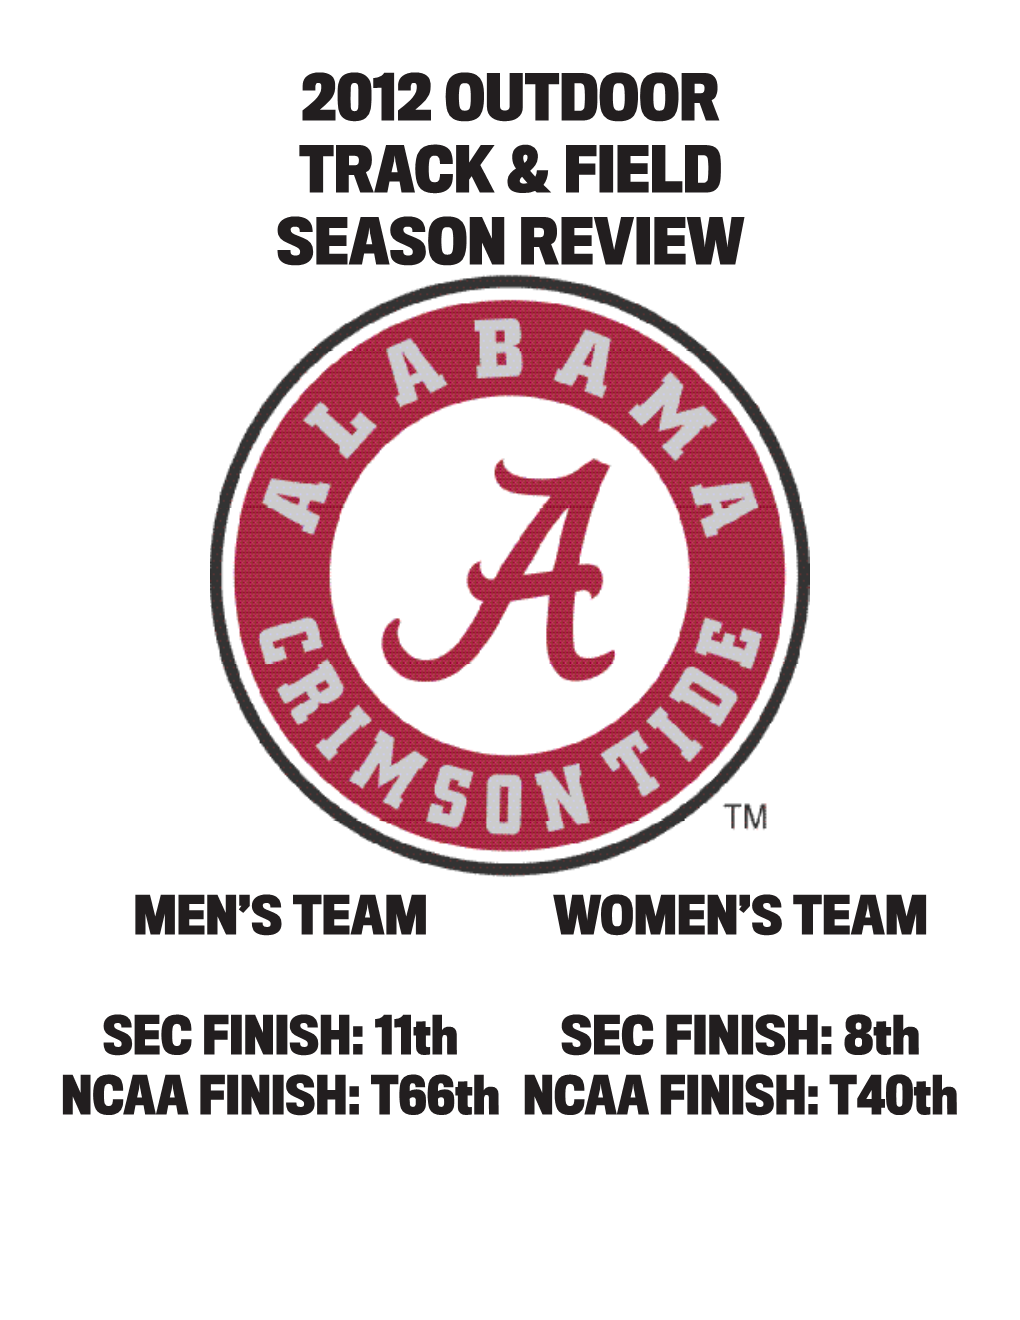 2012 Outdoor Track & Field Season Review